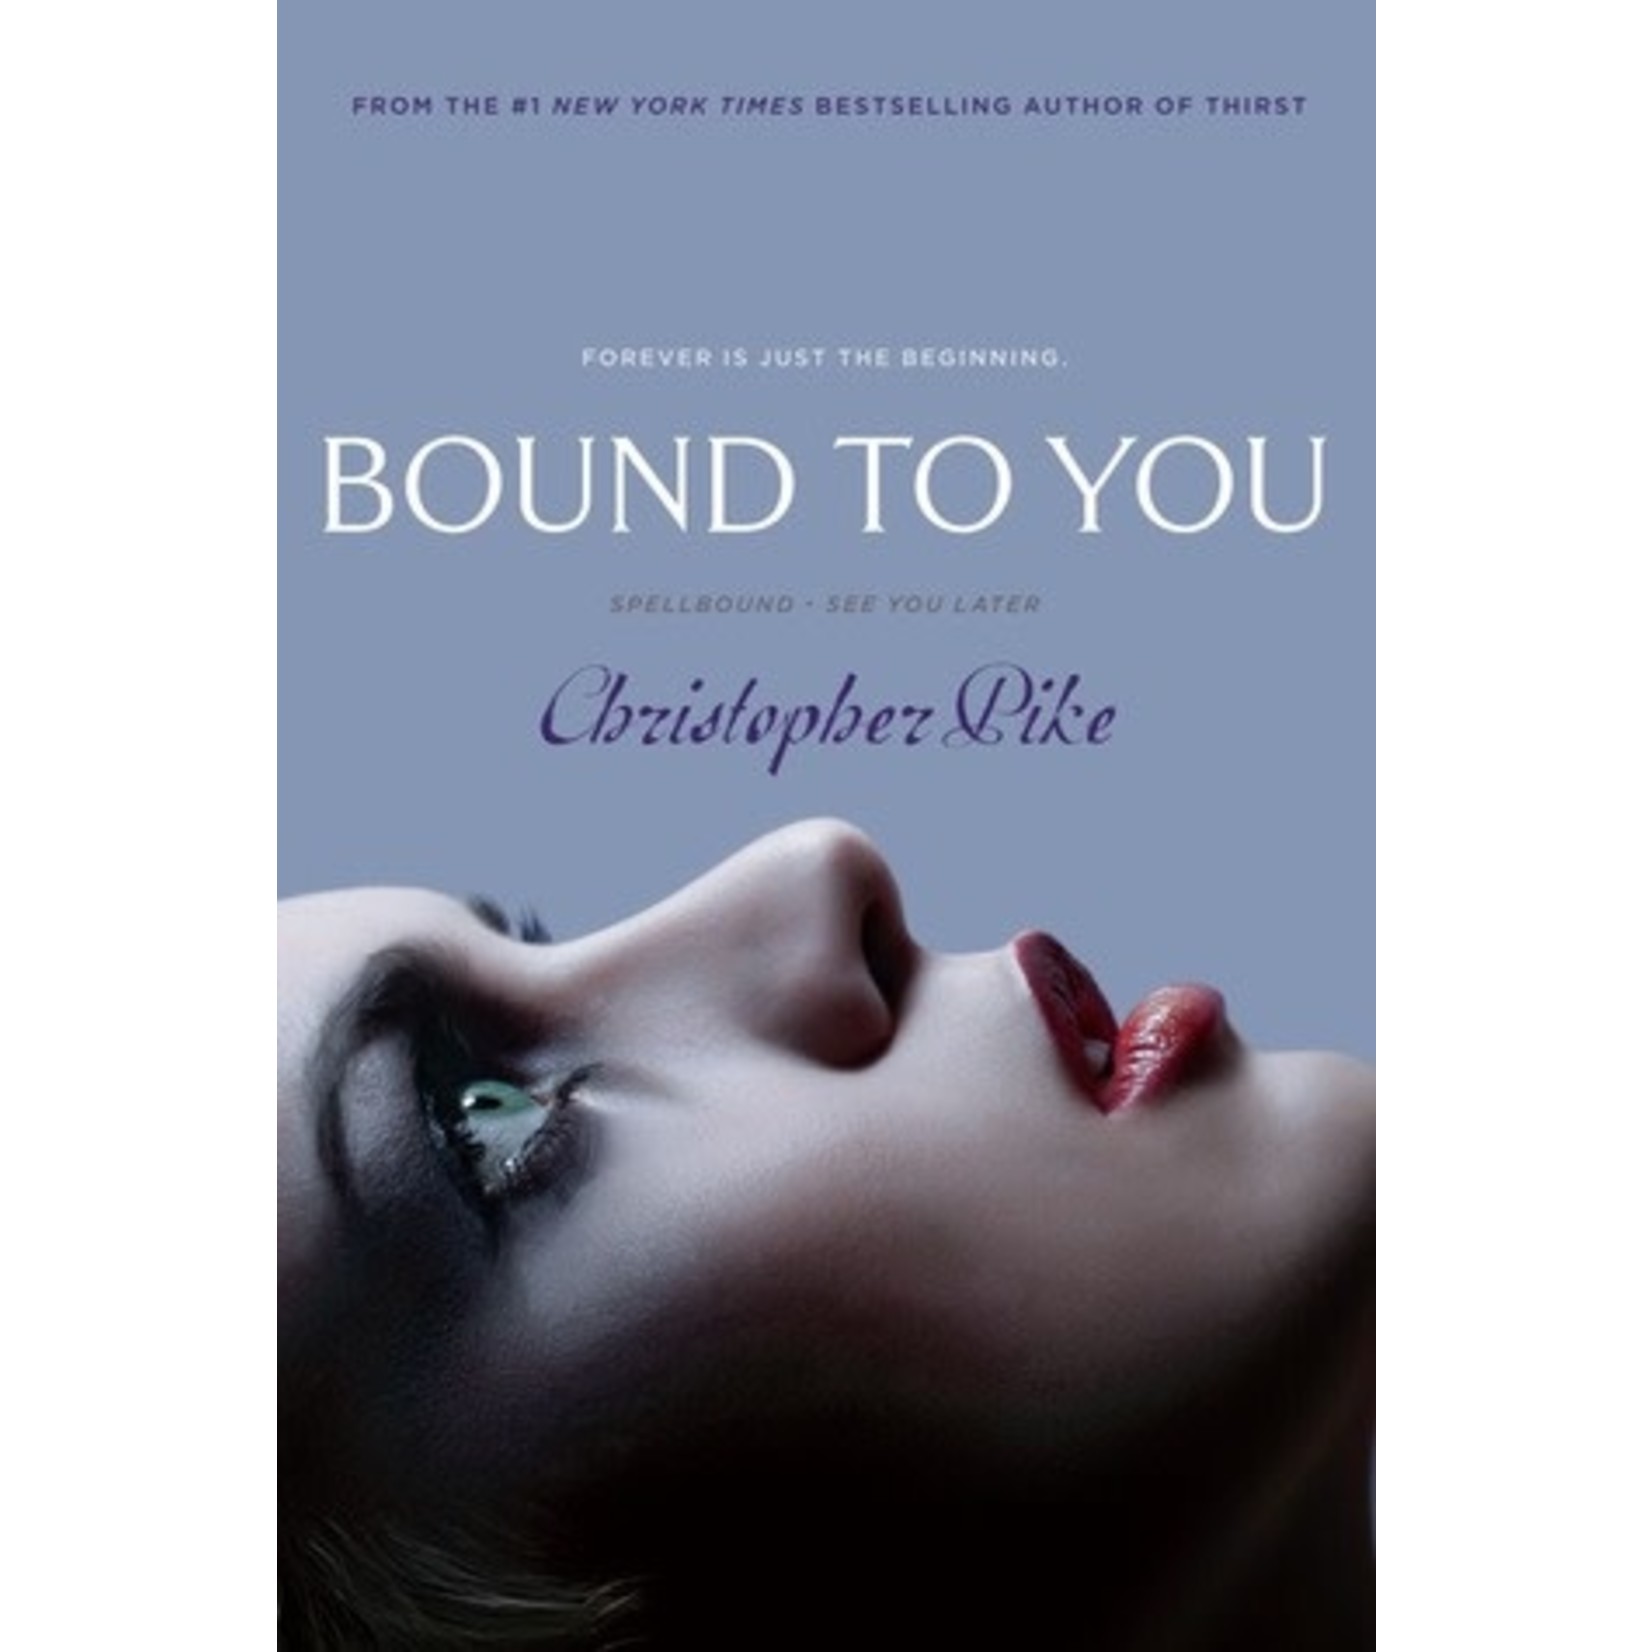 Christopher Pike Bound to You